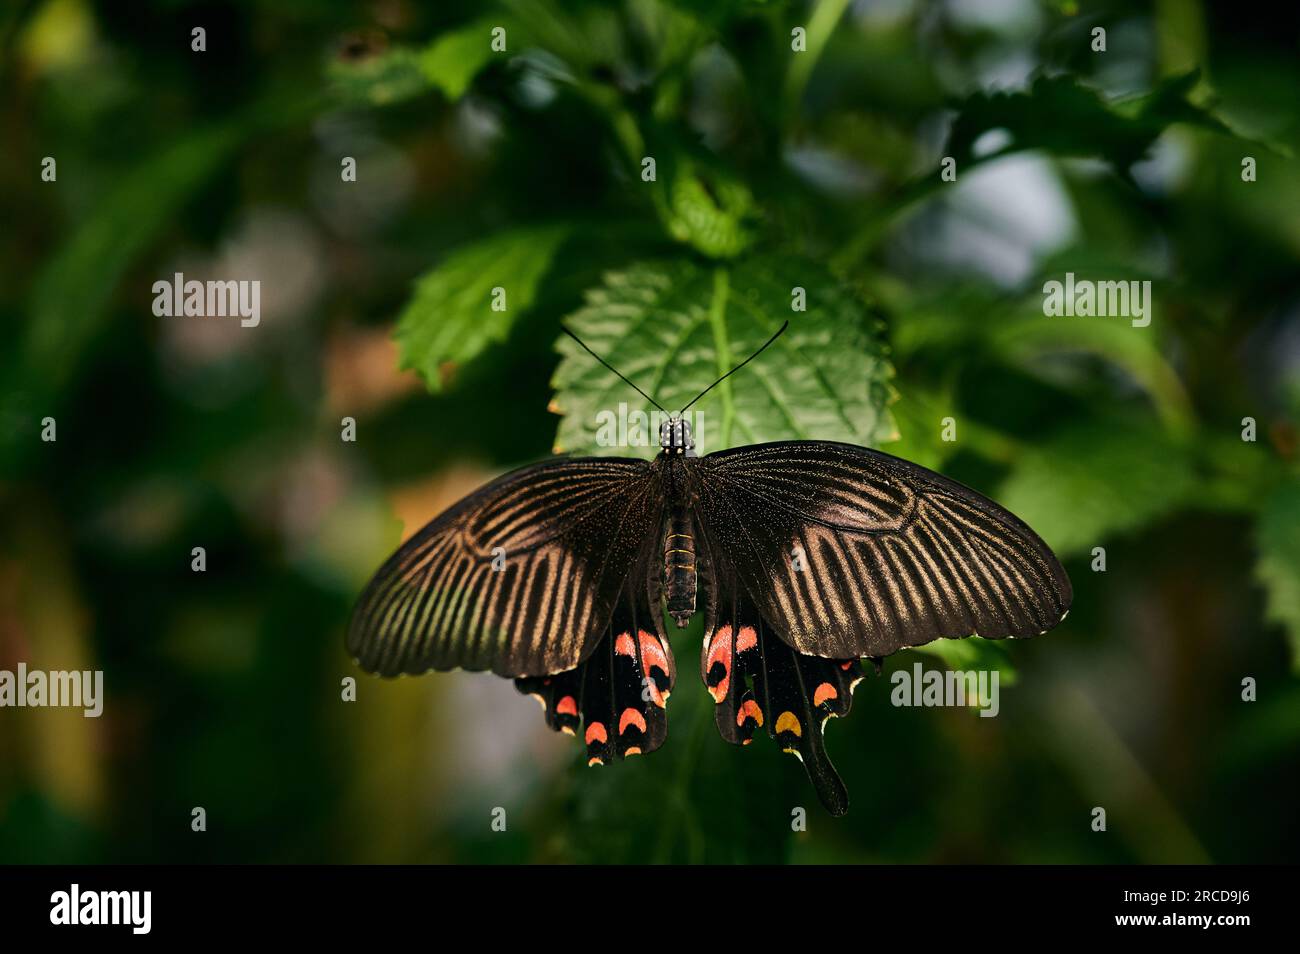 Fragile butterfly on green plant in garden Stock Photo